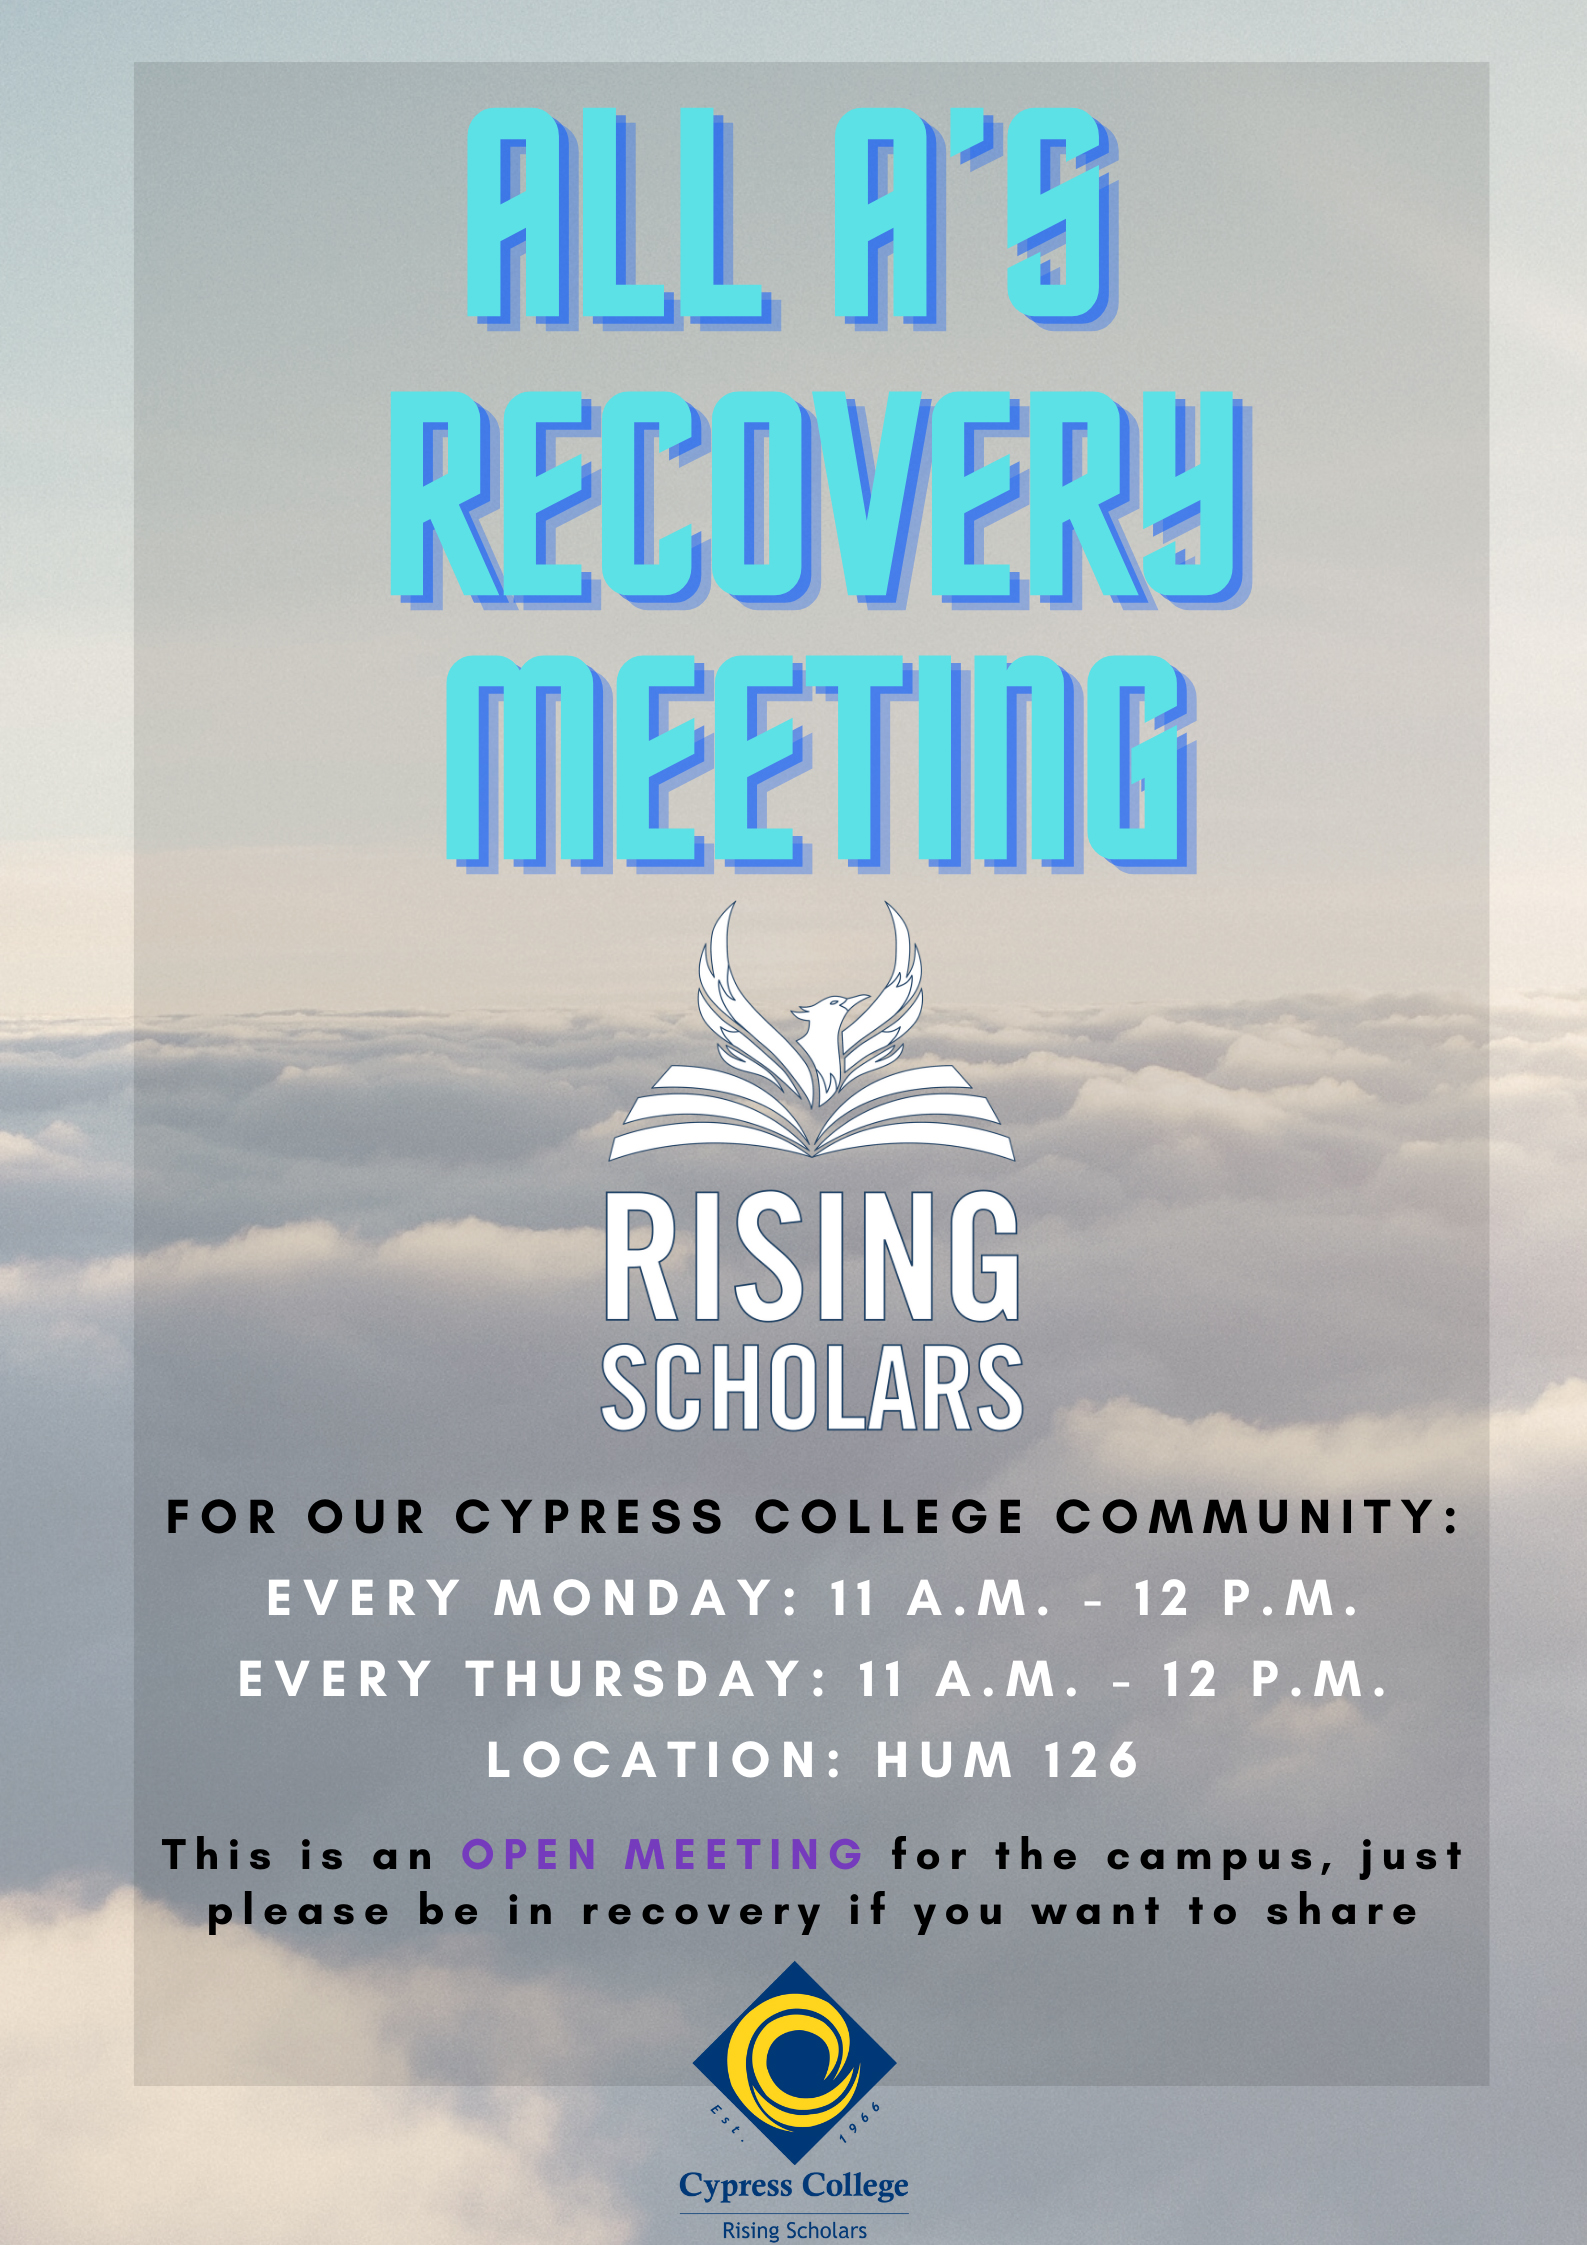 A flyer for All A's Recovery Meetings, the details of which can be found in this post.